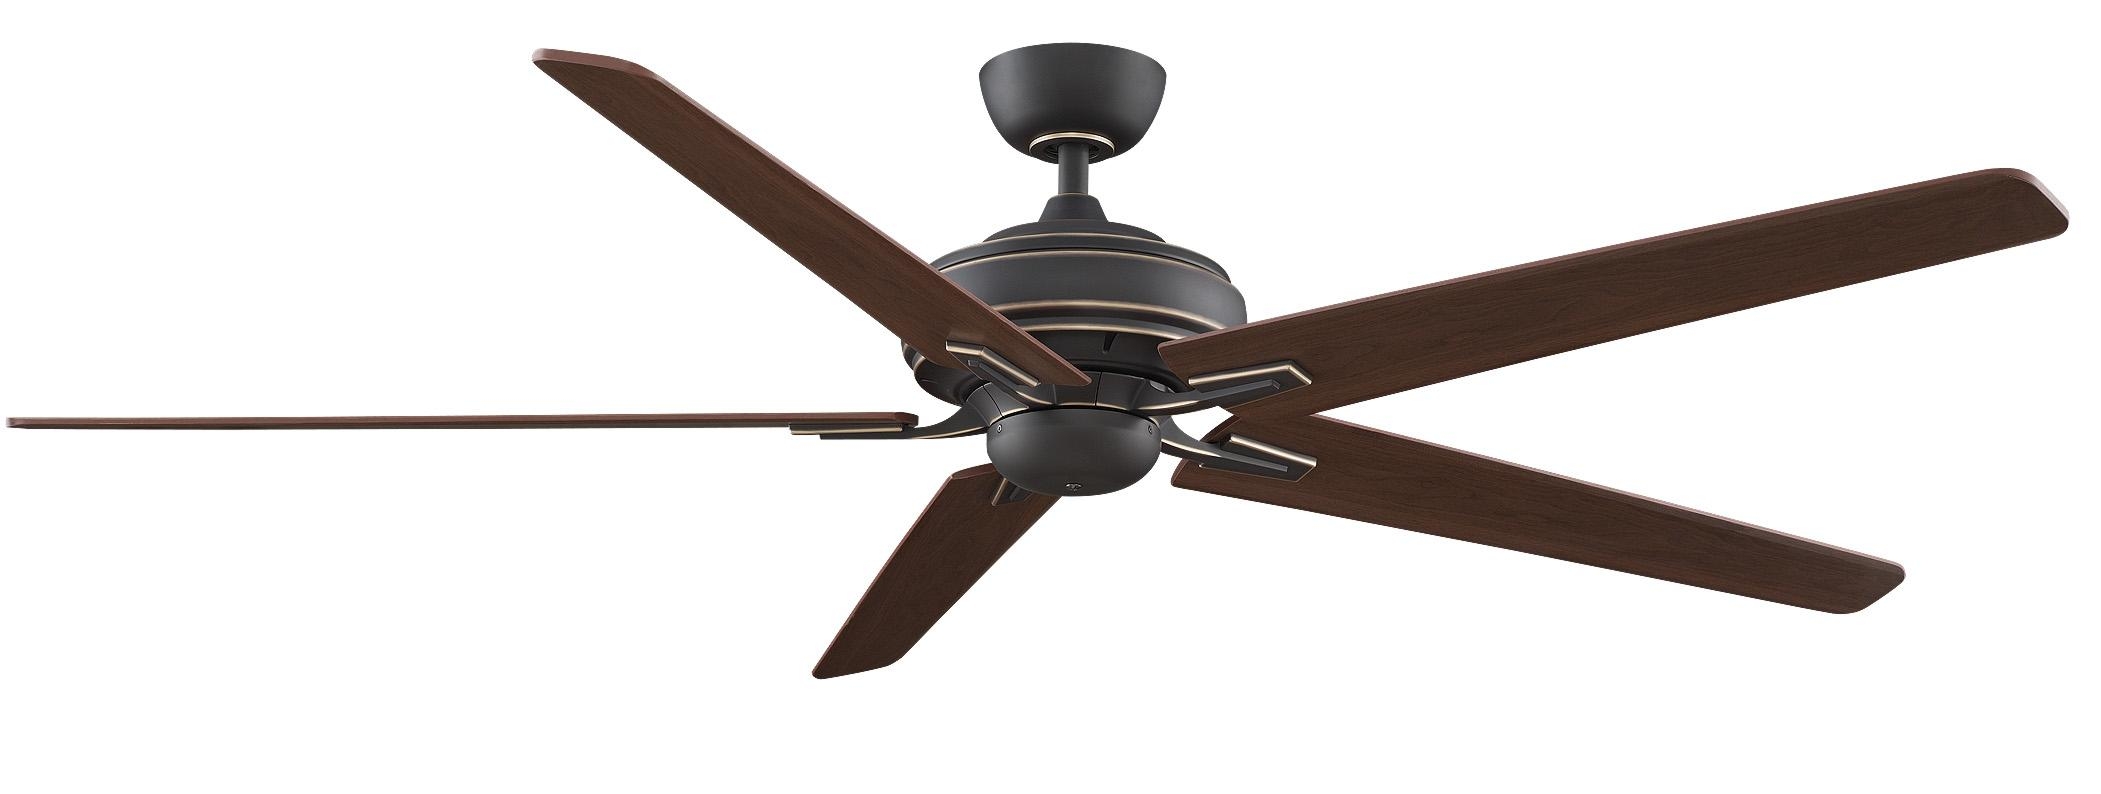 Permalink to Large Ceiling Fan No Light